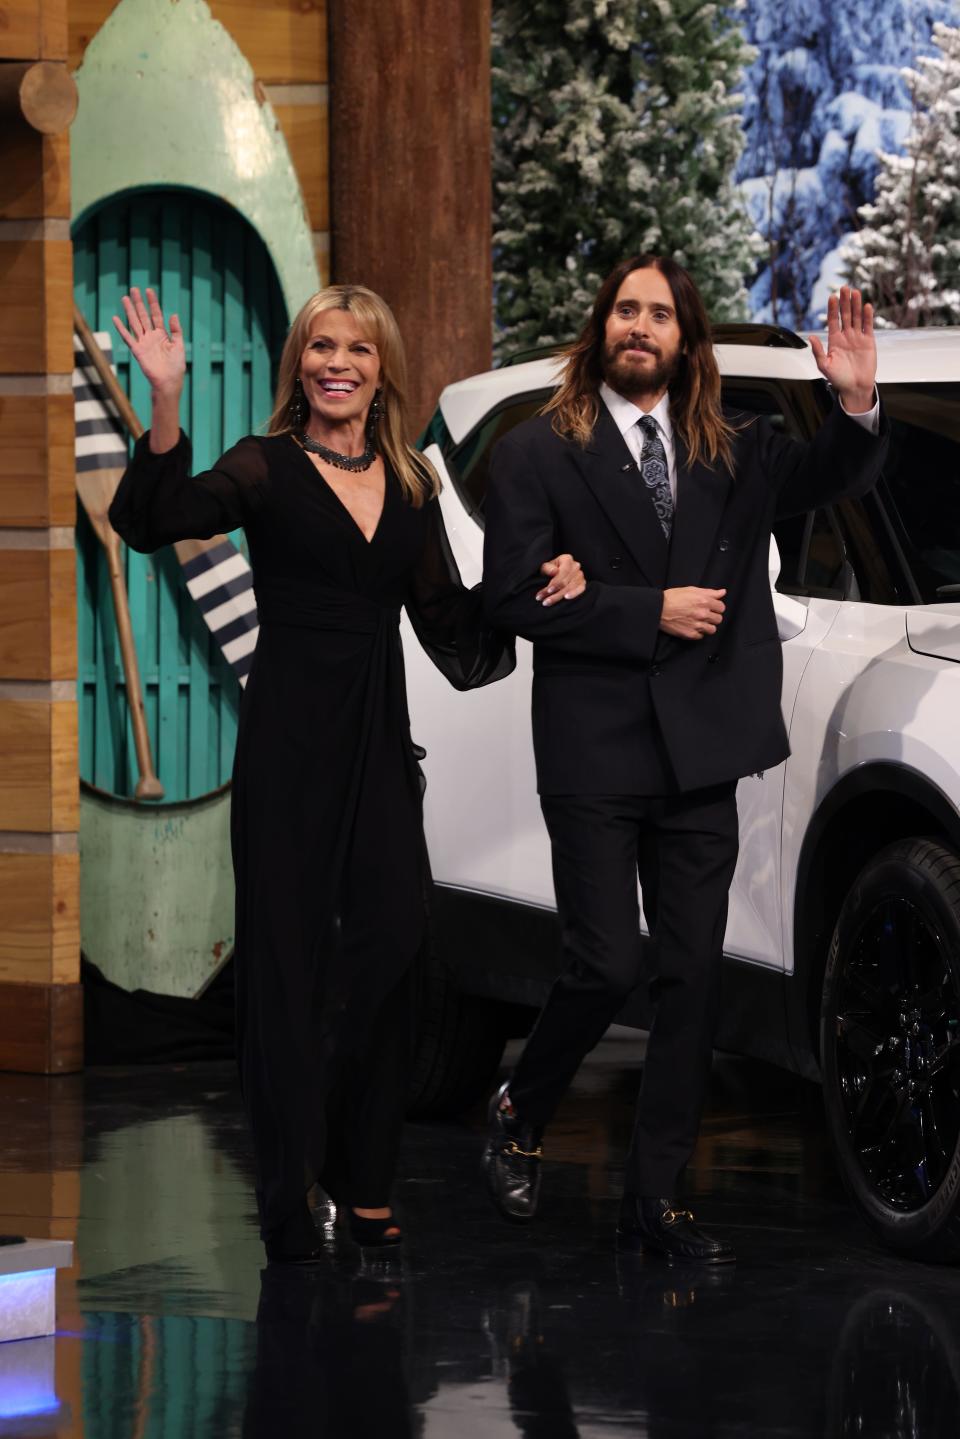 Jared Leto and Vanna White walk out on Monday's "Wheel of Fortune."